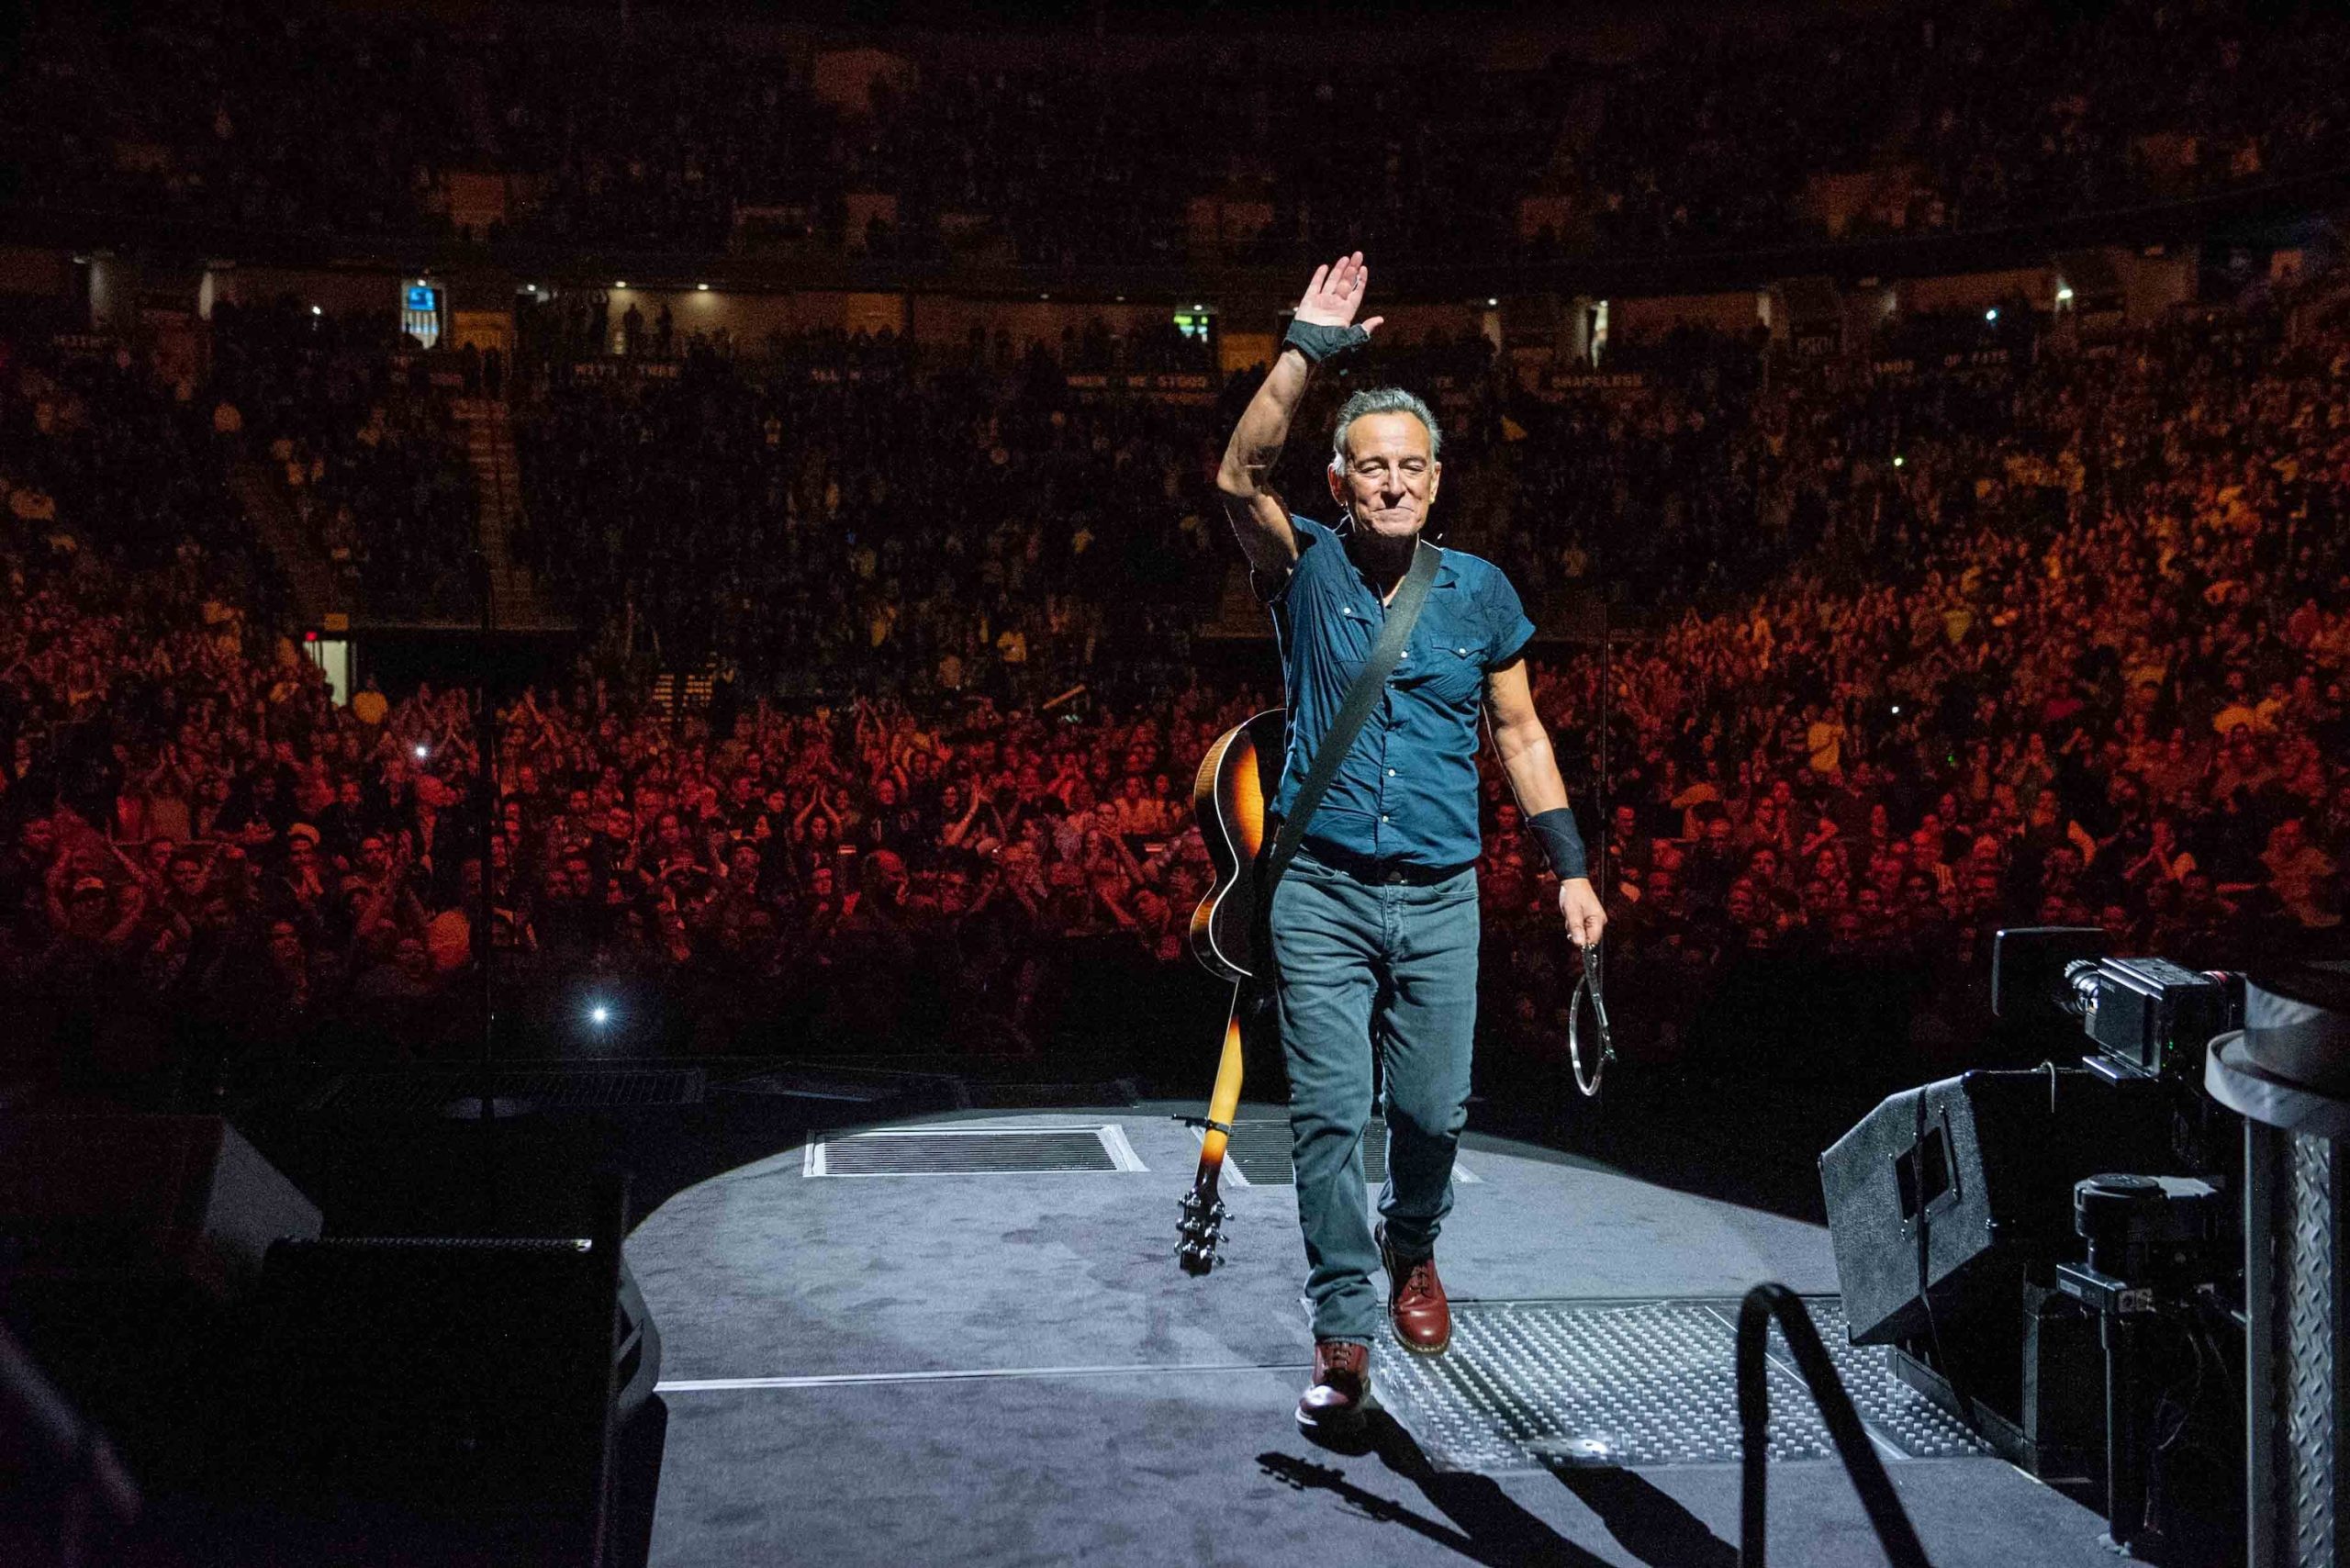 Bruce Springsteen & E Street Band at Bryce Jordan Center, State College, Pennsylvania on March 18, 2023.